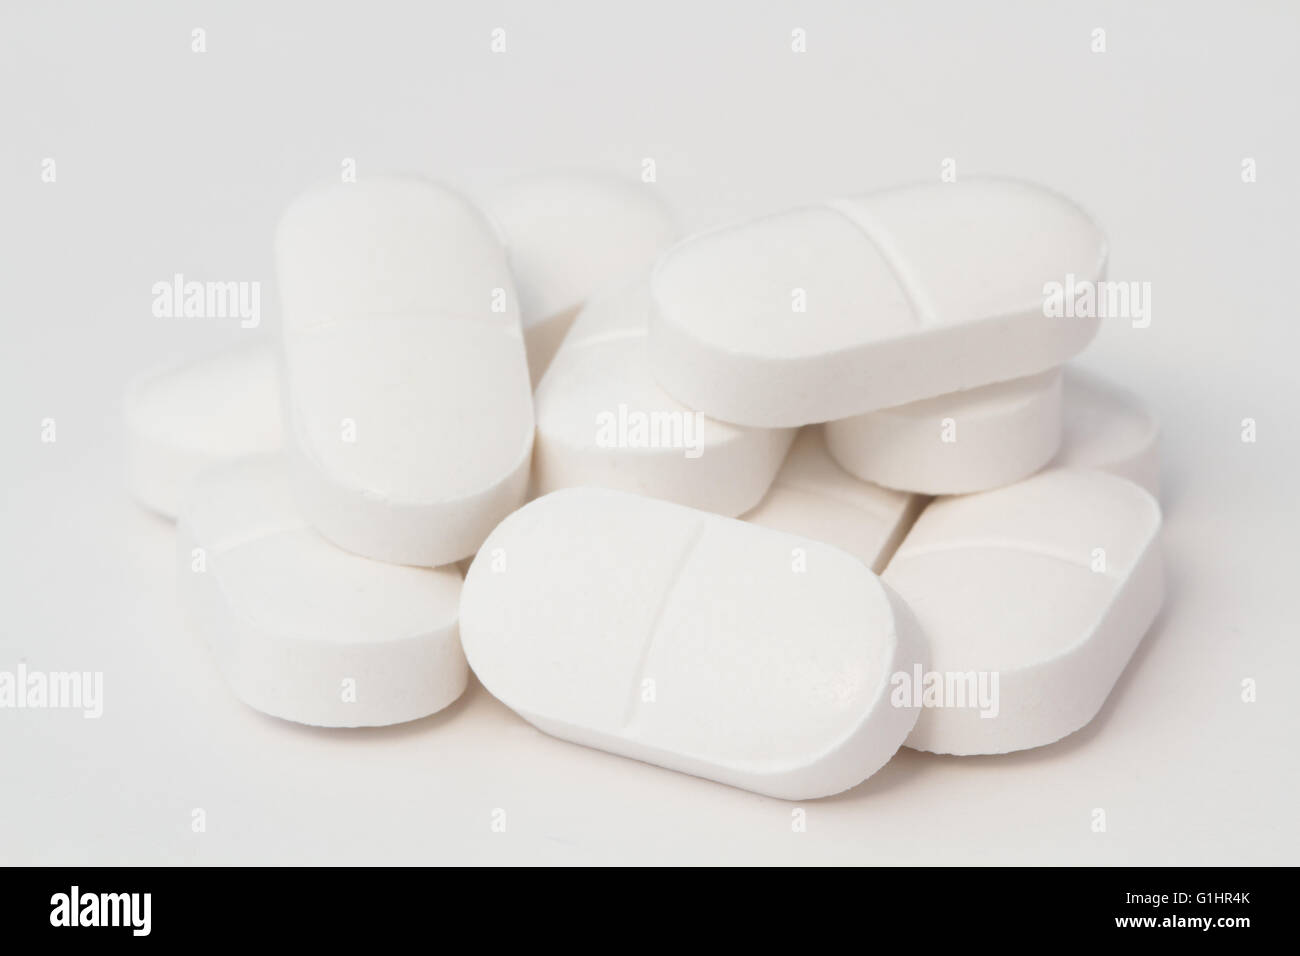 A small pile of white painkilling tablets or paracetamol with two halves on an isolated white background. Stock Photo